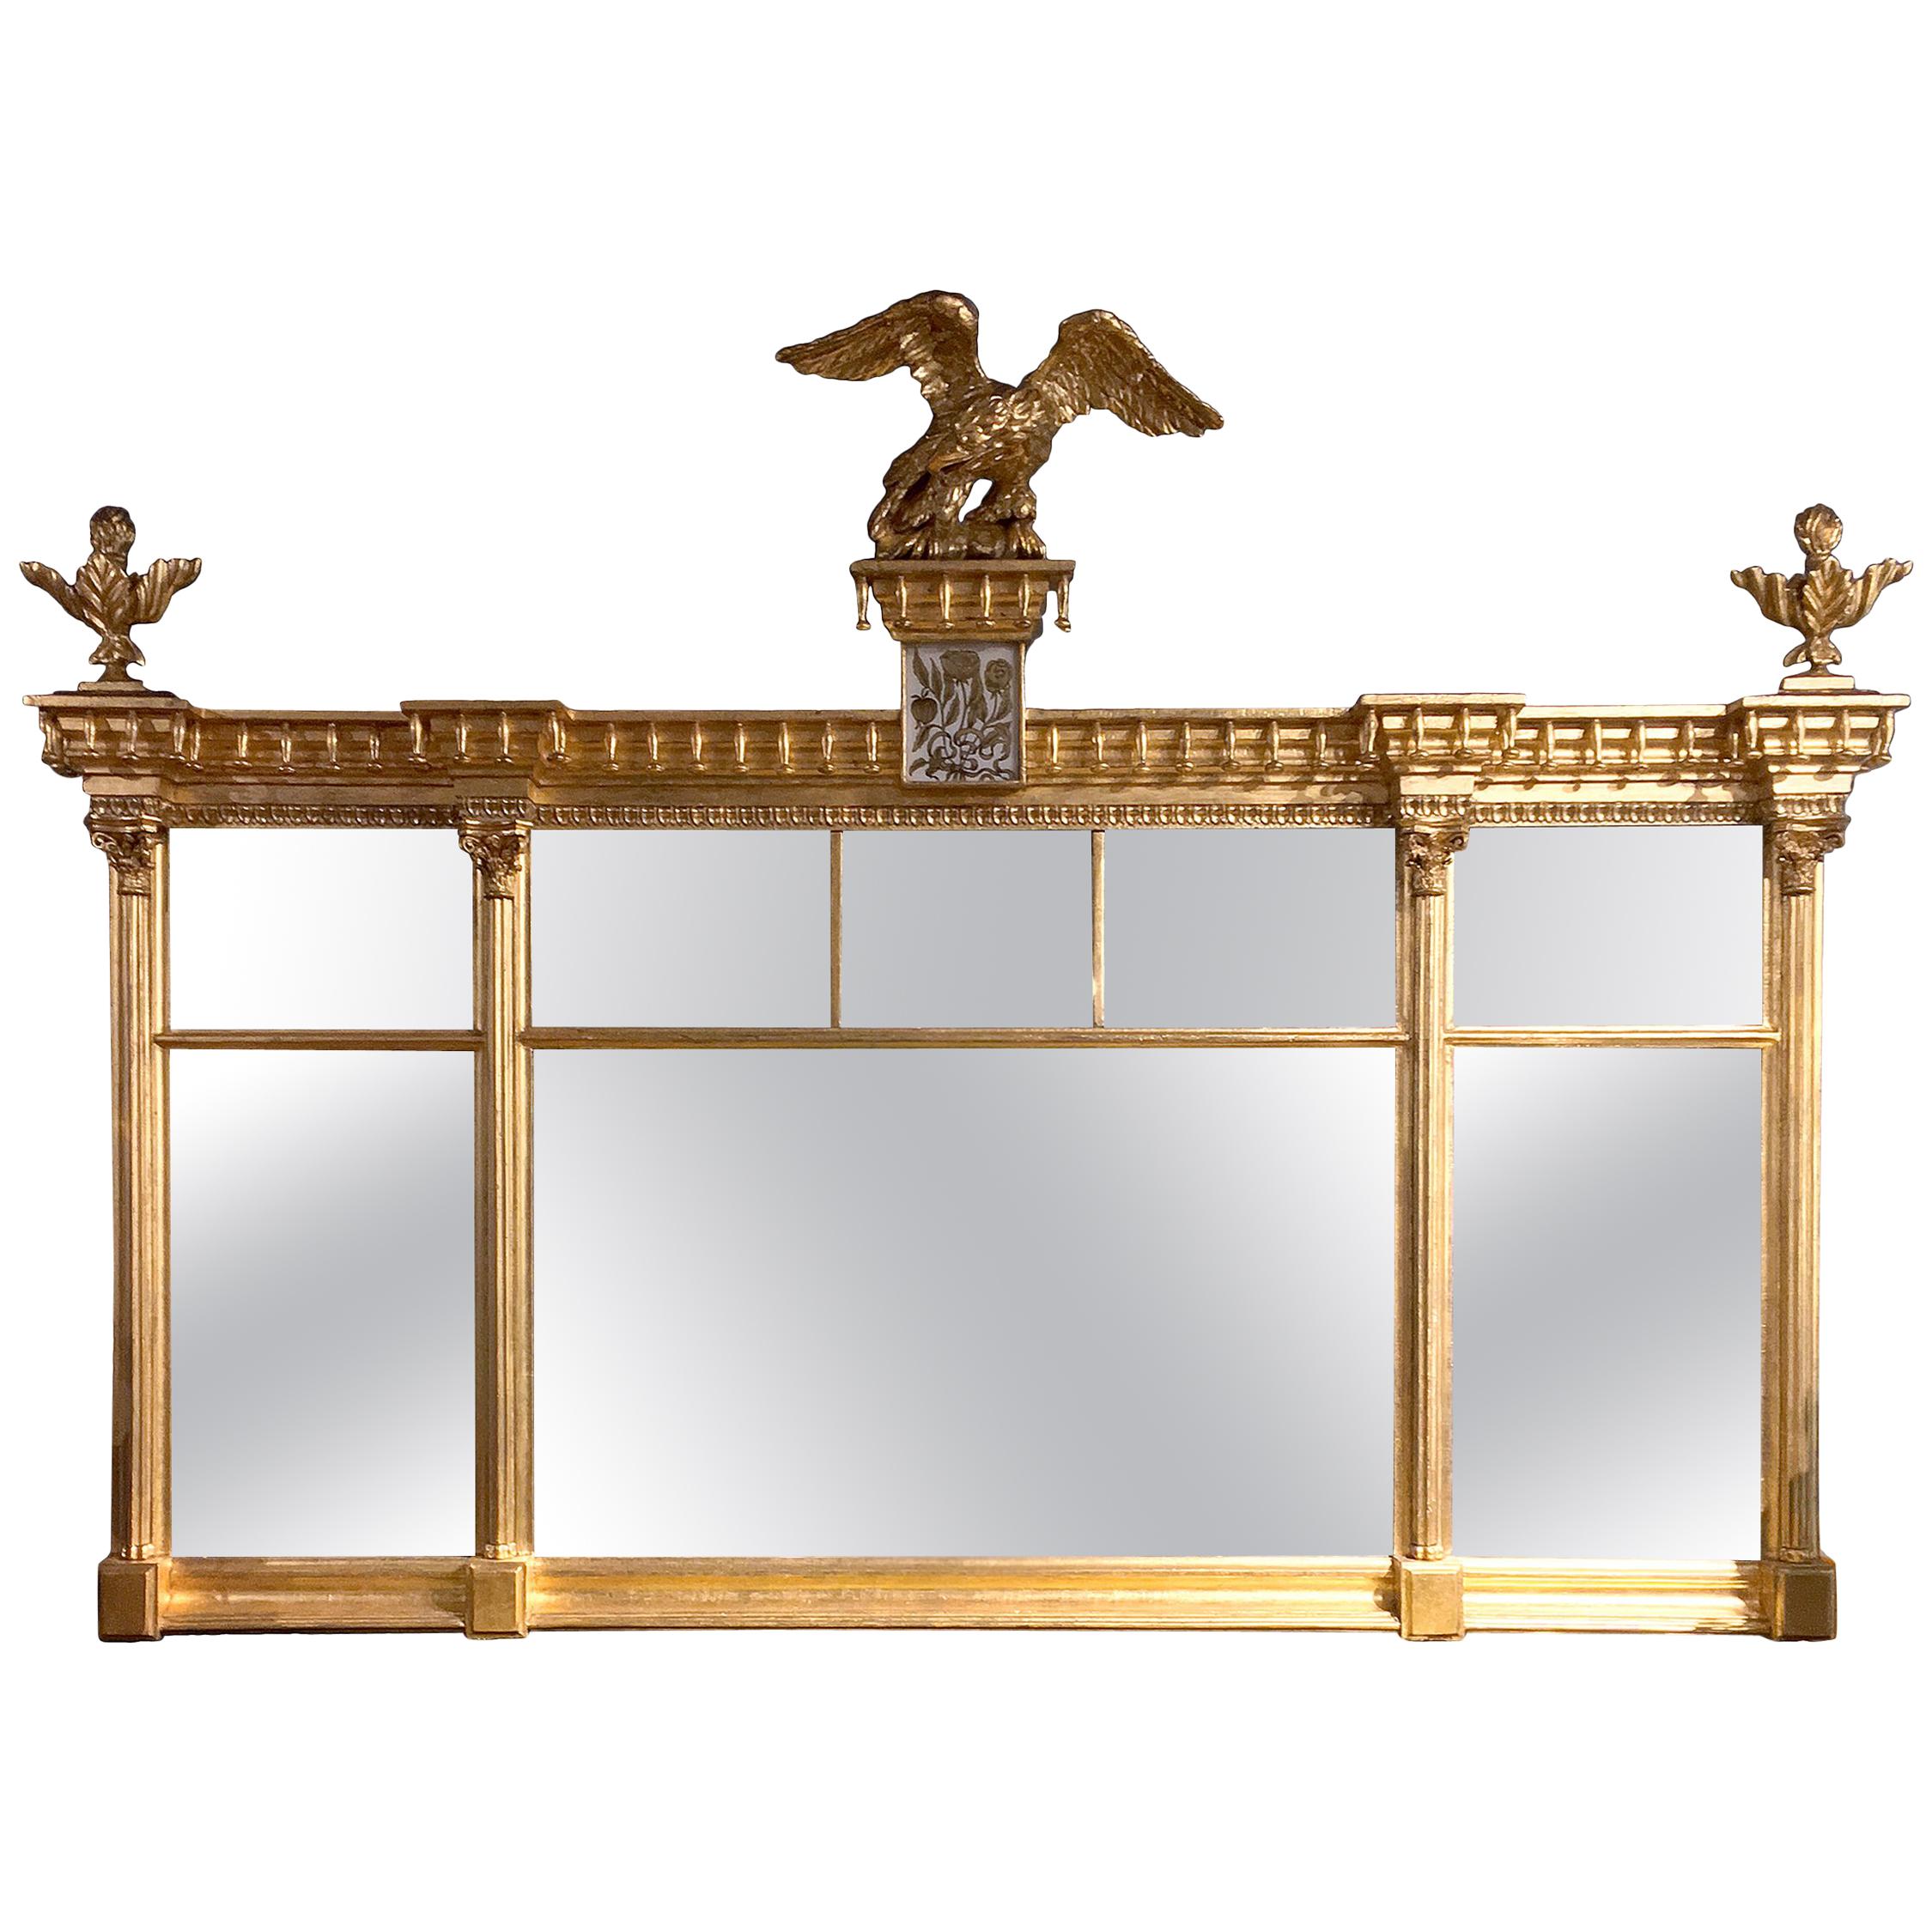 Early 19th Century American Federal Gilt Overmantel Mirror For Sale